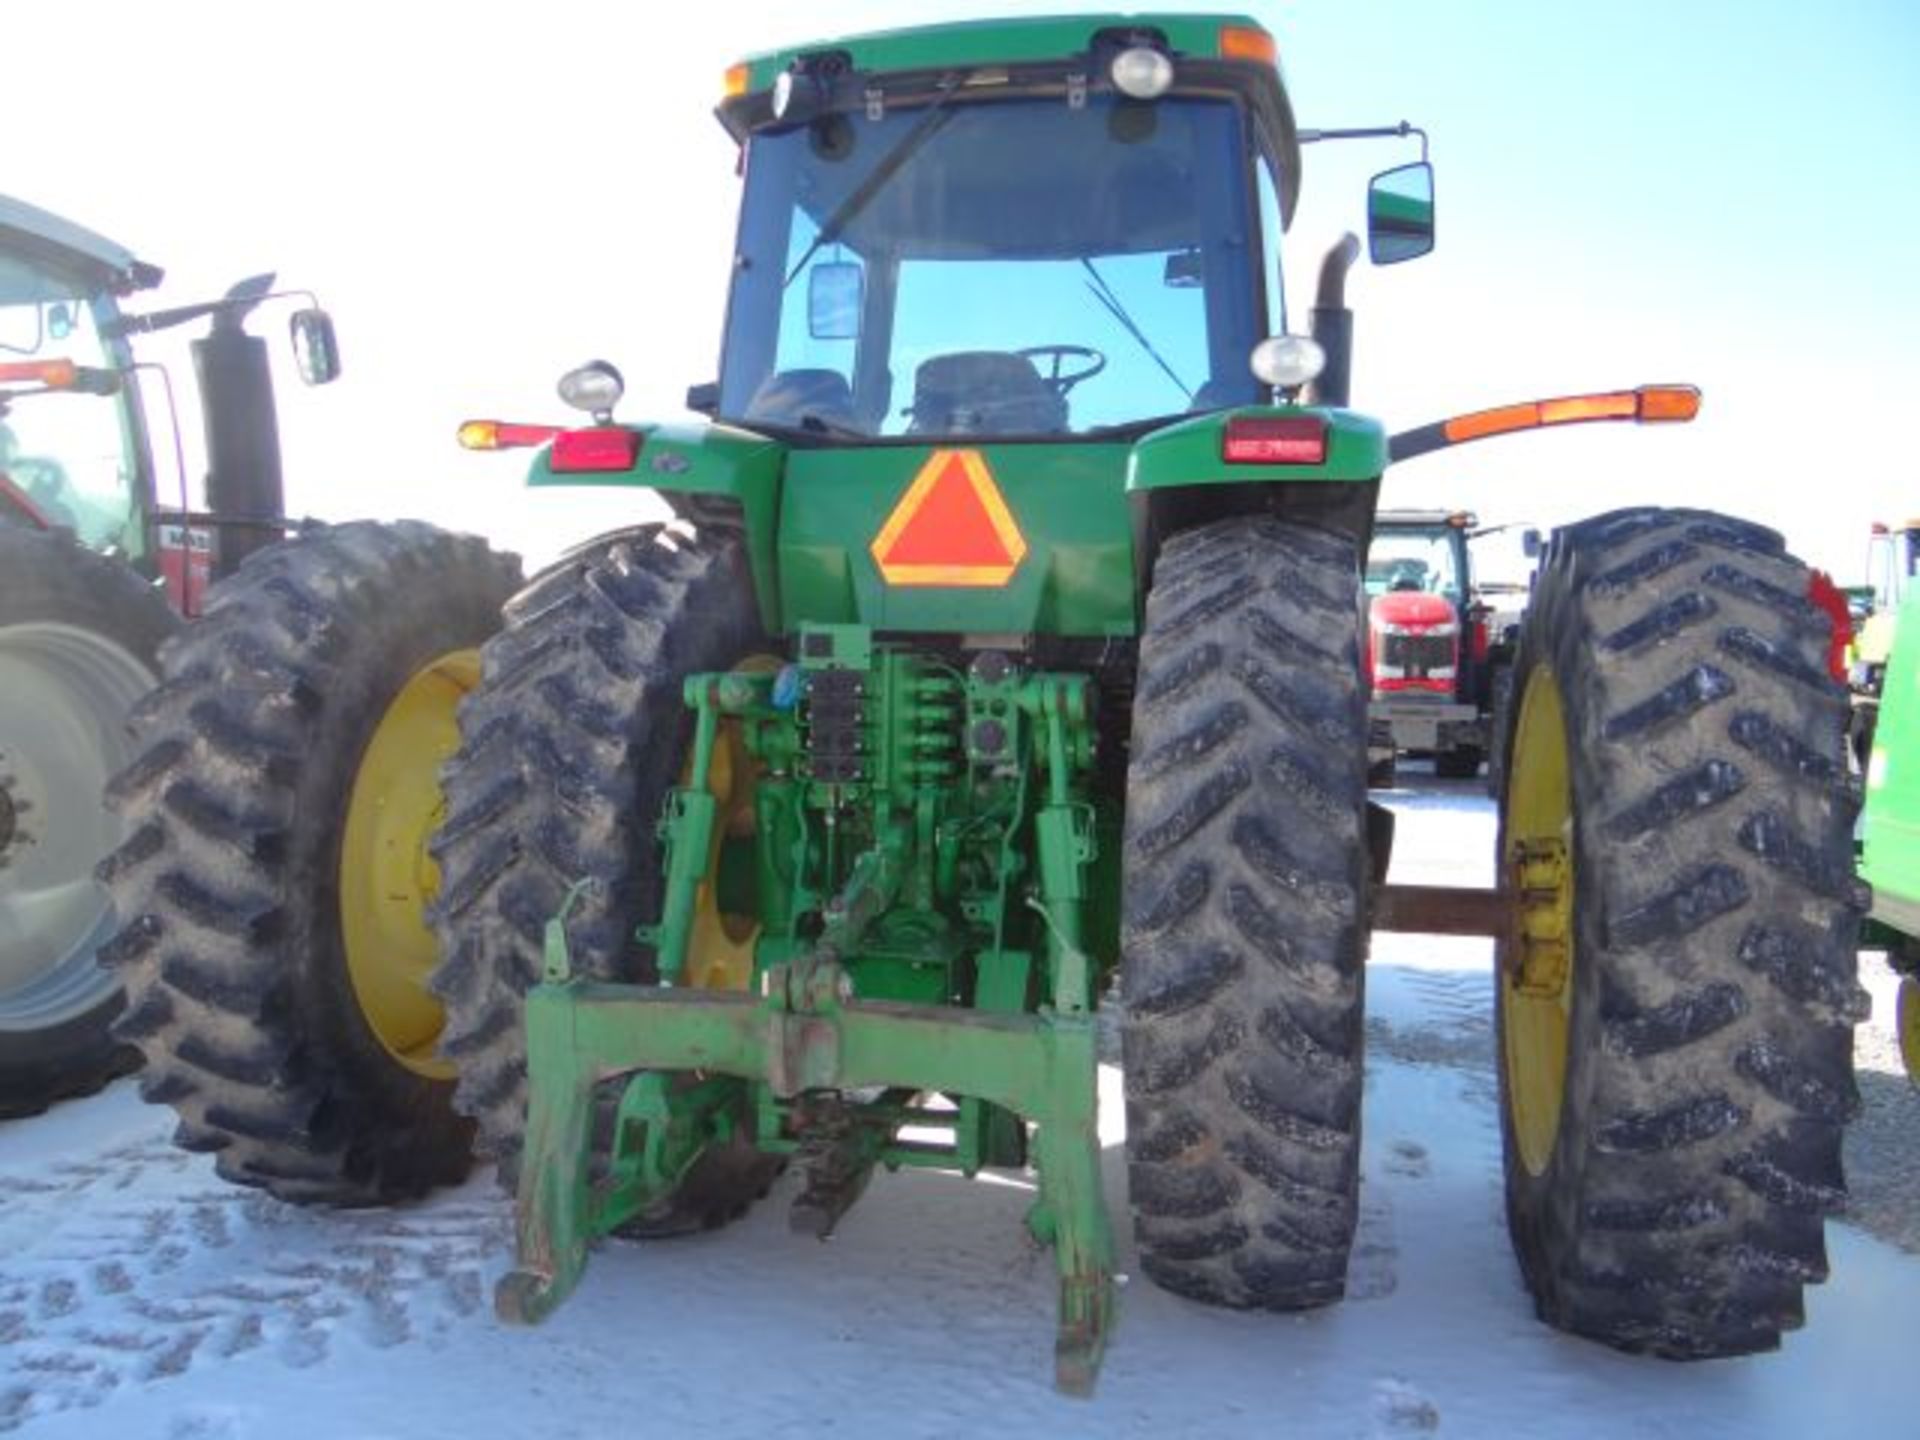 JD 8420 Tractor MFWD, 4 SCV, 18.4-46 Rear Tires, AutoTrac Ready, 6631hrs - Image 4 of 5